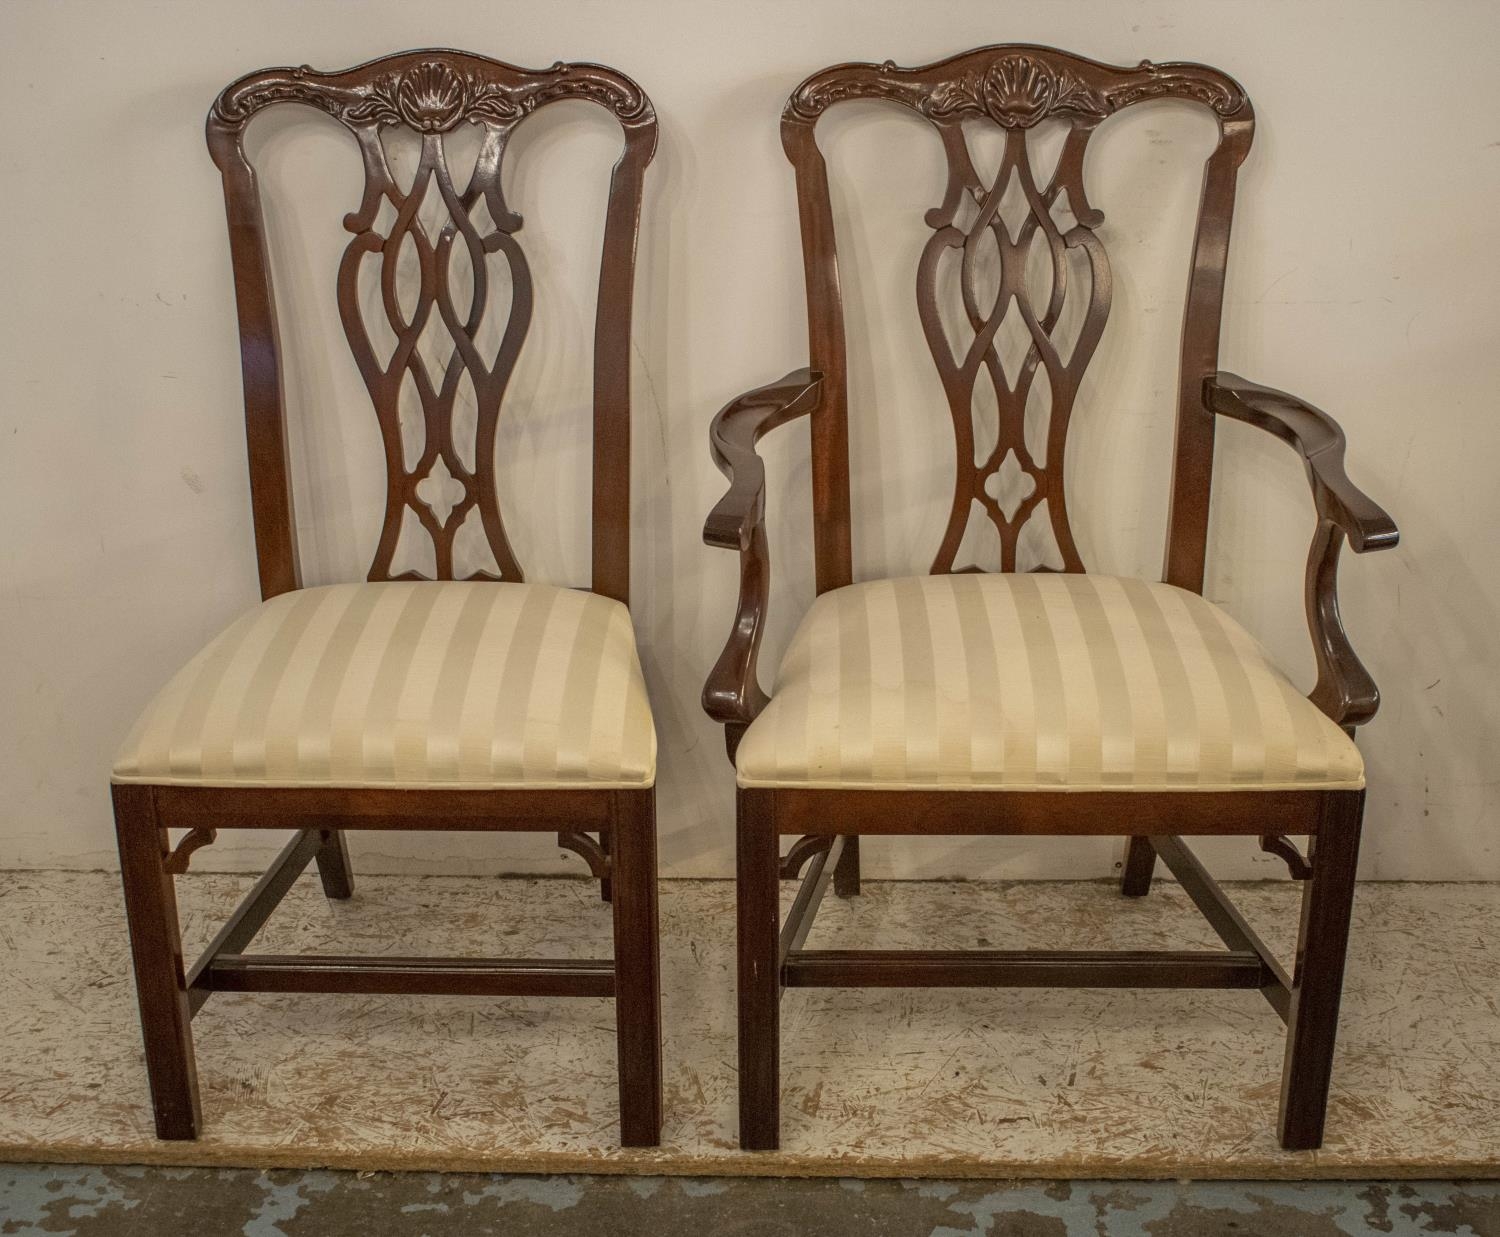 DINING CHAIRS, a set of twelve, Chippendale style, including two armchairs with cream damask